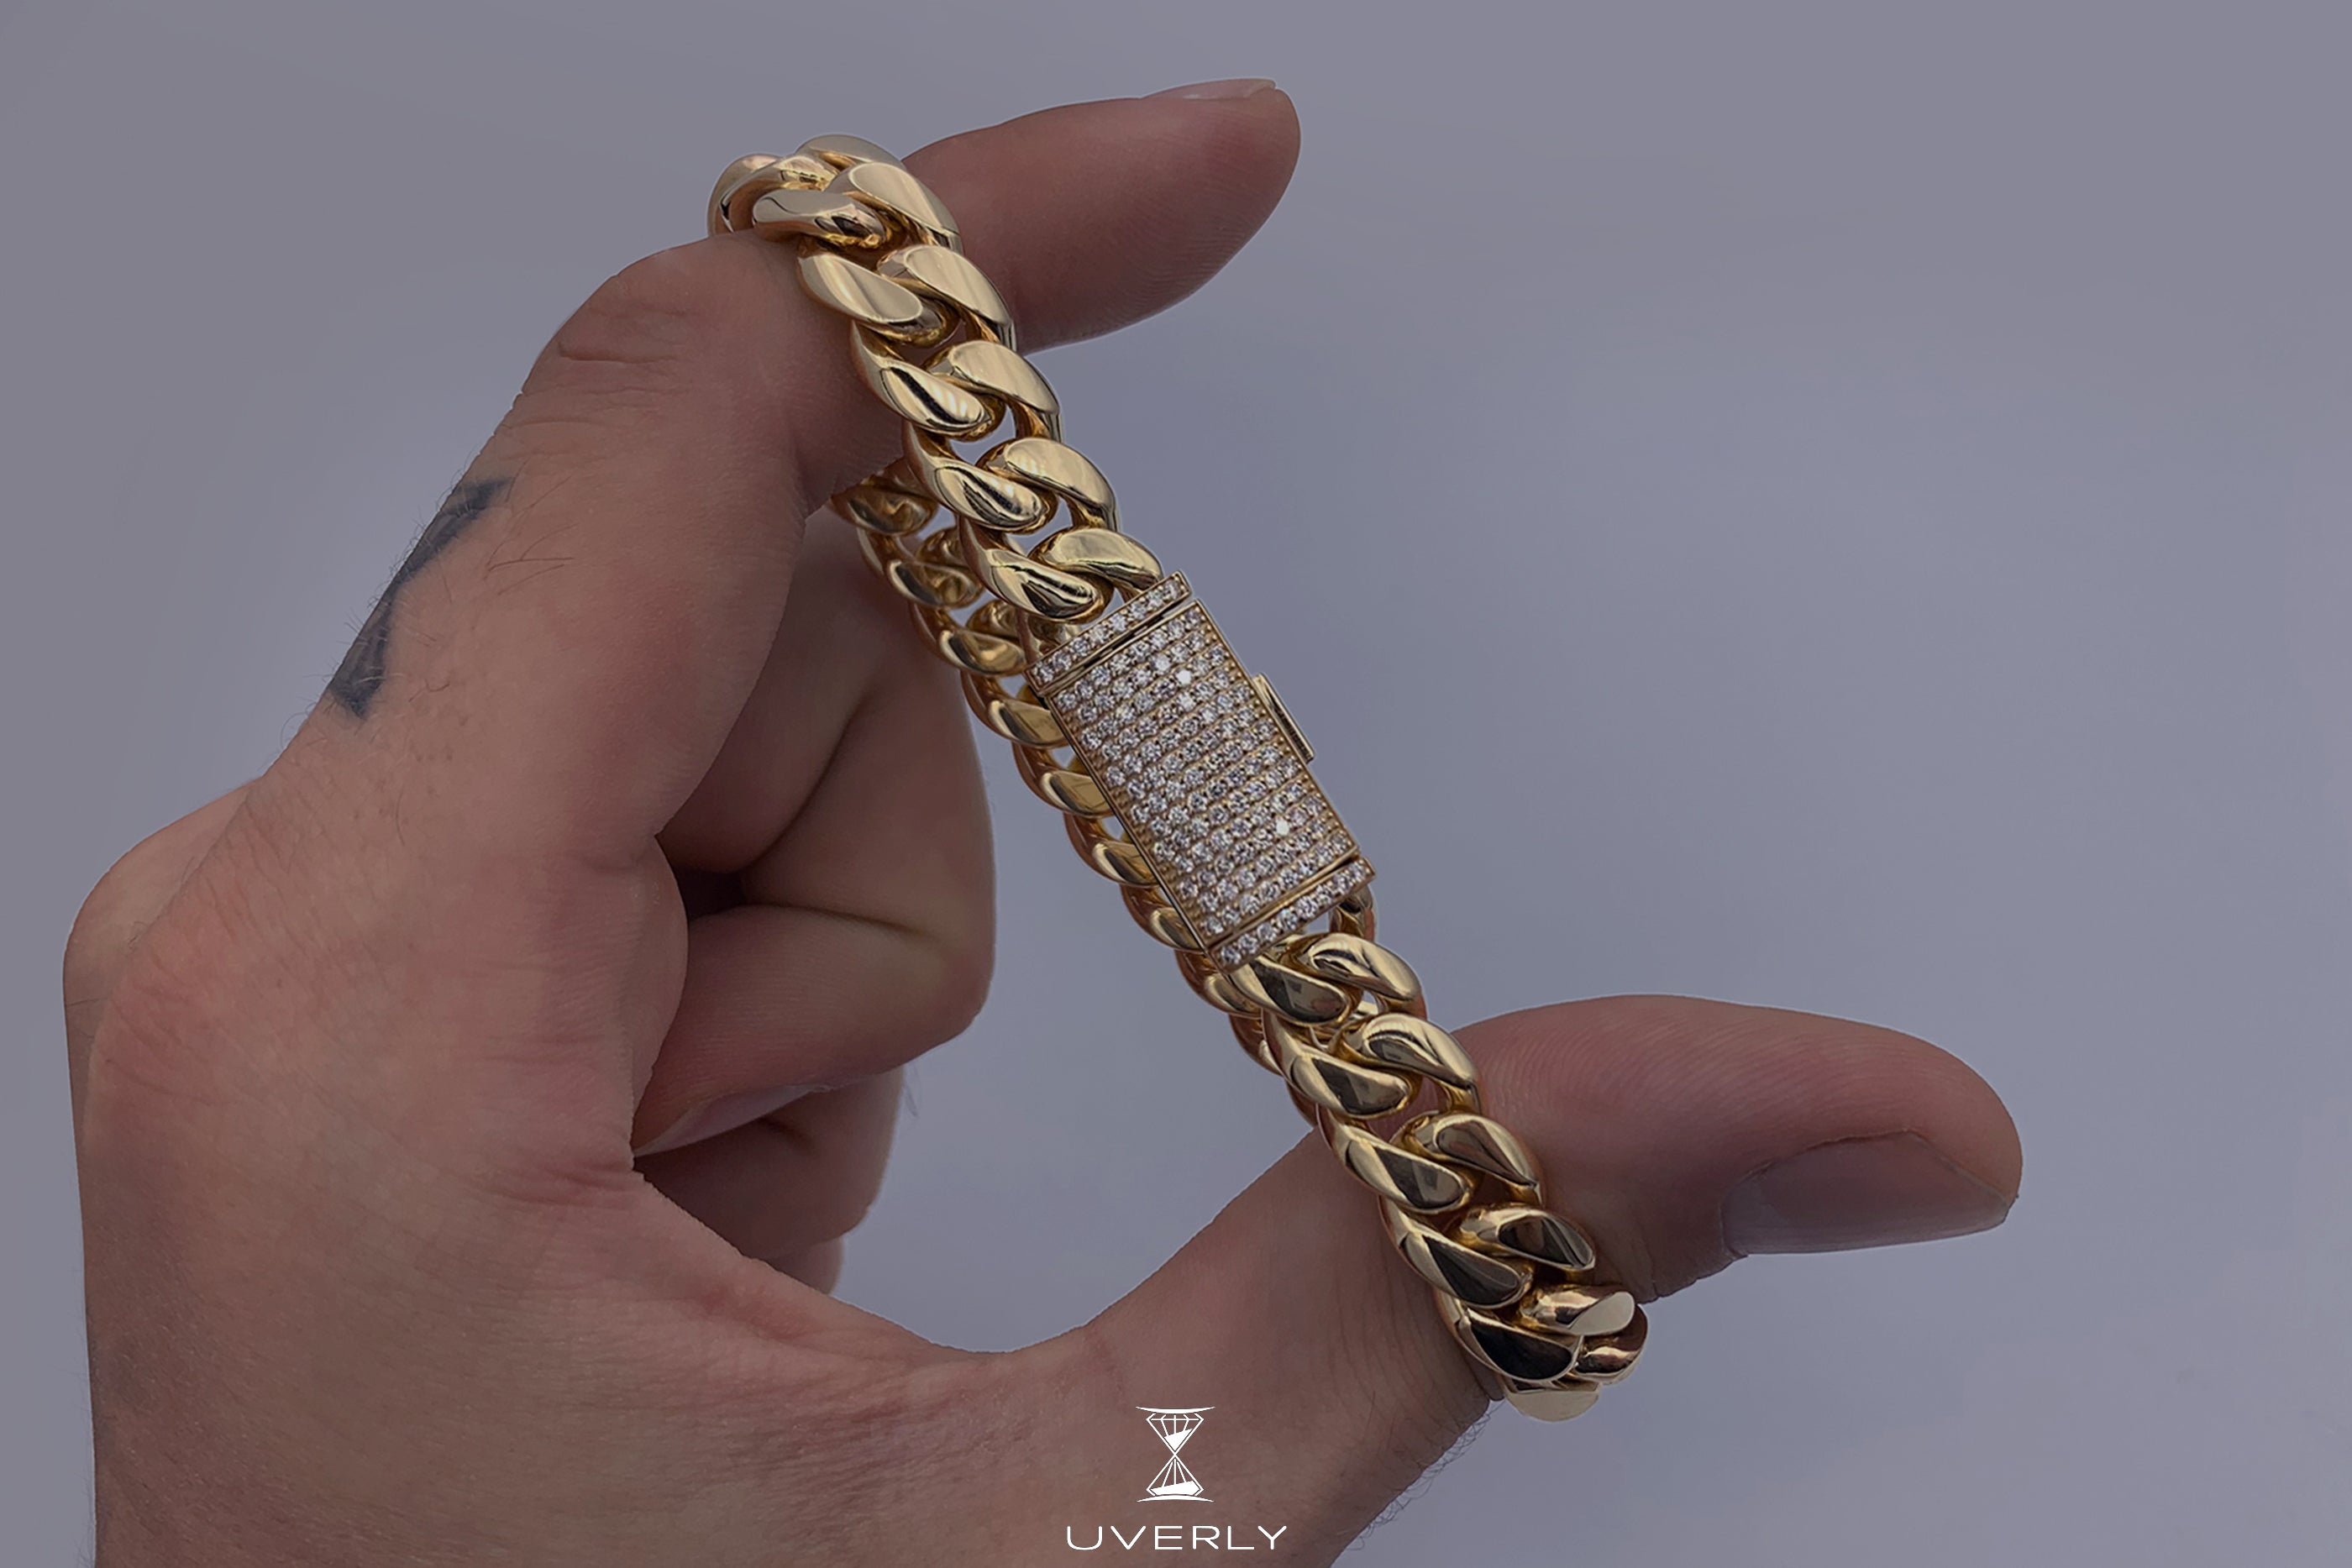 Yellow Gold Links With White Diamonds On a Cord Bracelet